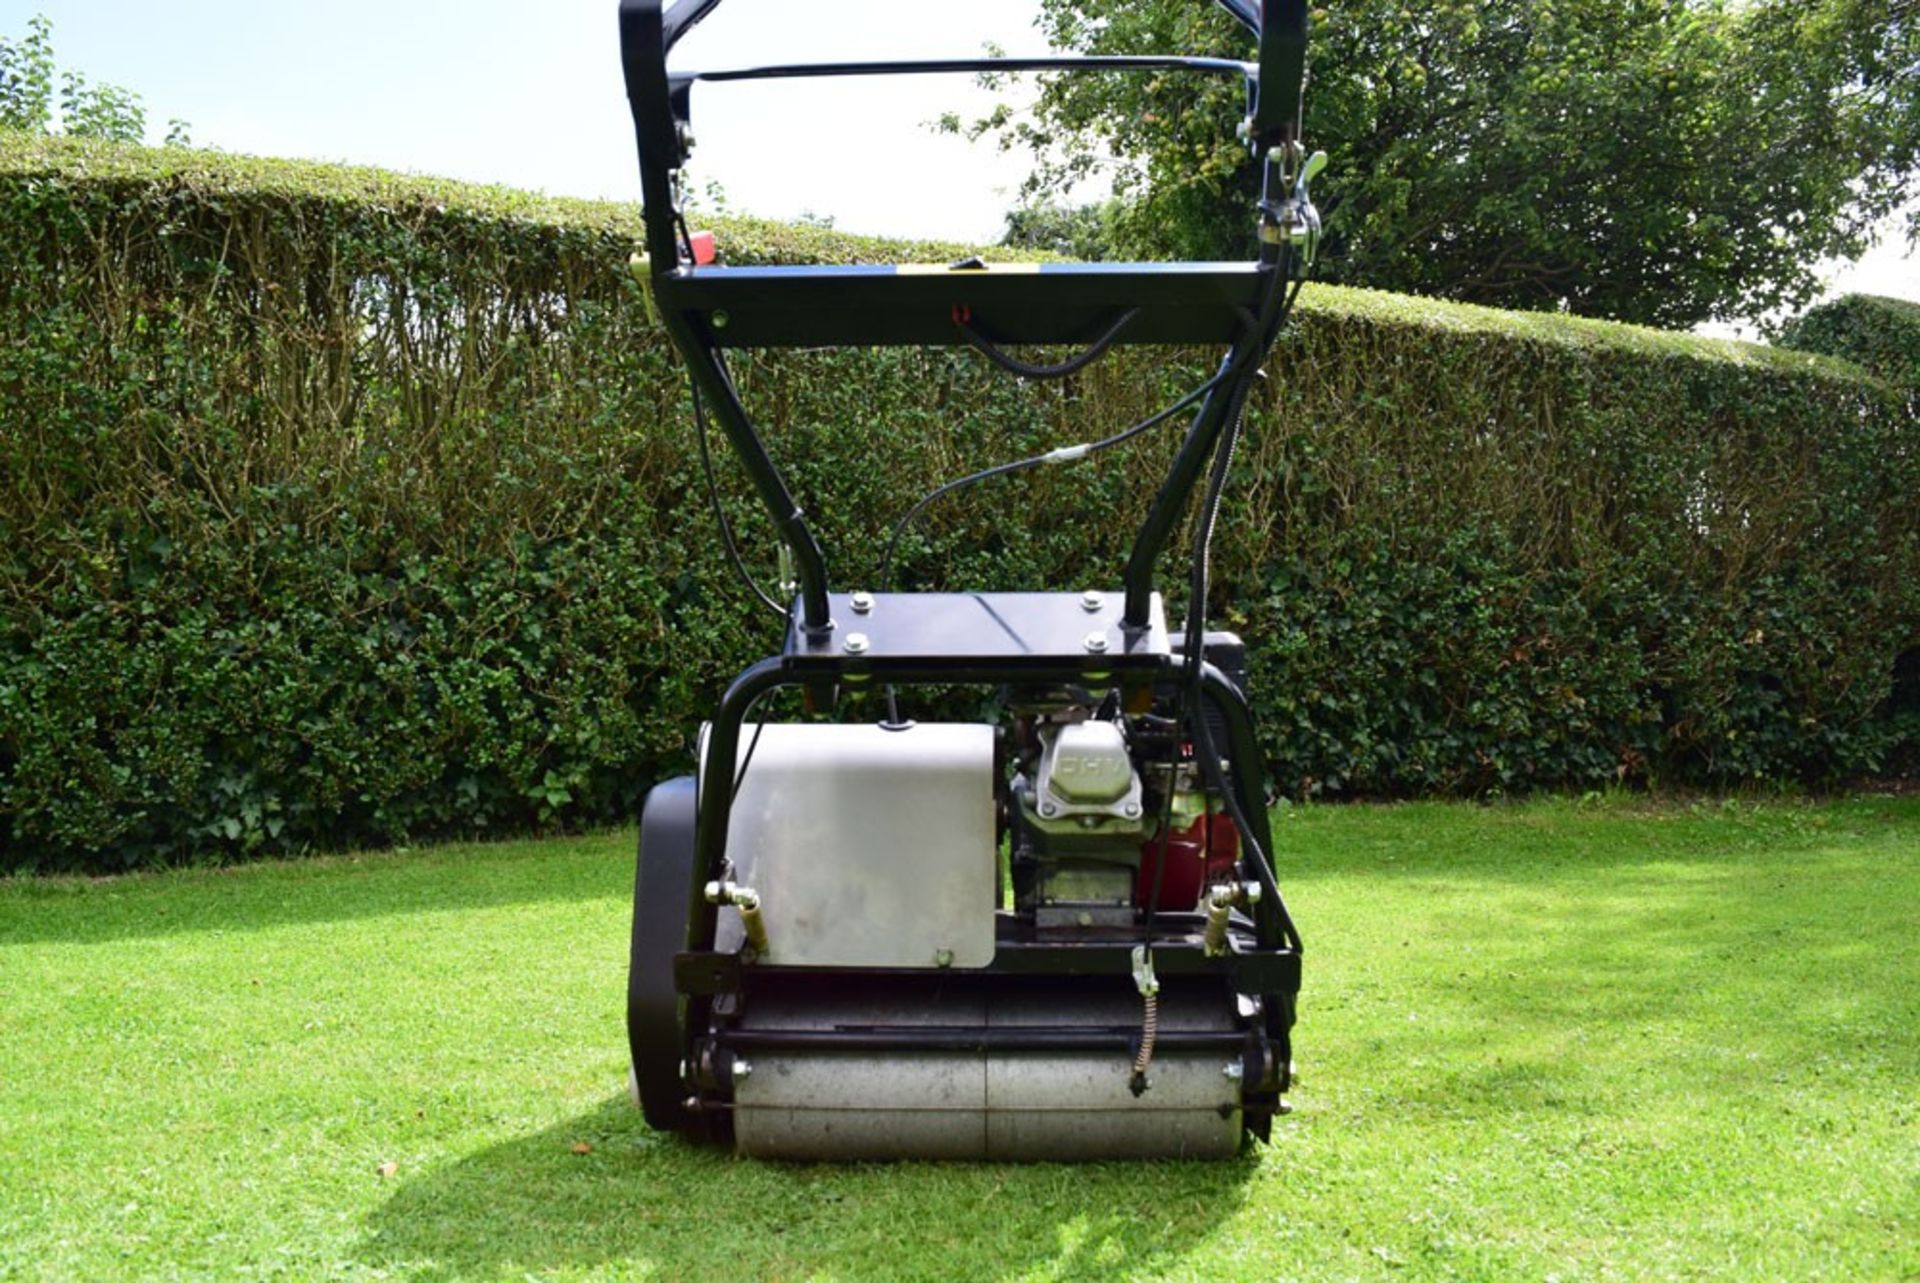 2012 Allett Shaver 20, 10 Blade Cylinder Mower With Grass Box - Image 8 of 9